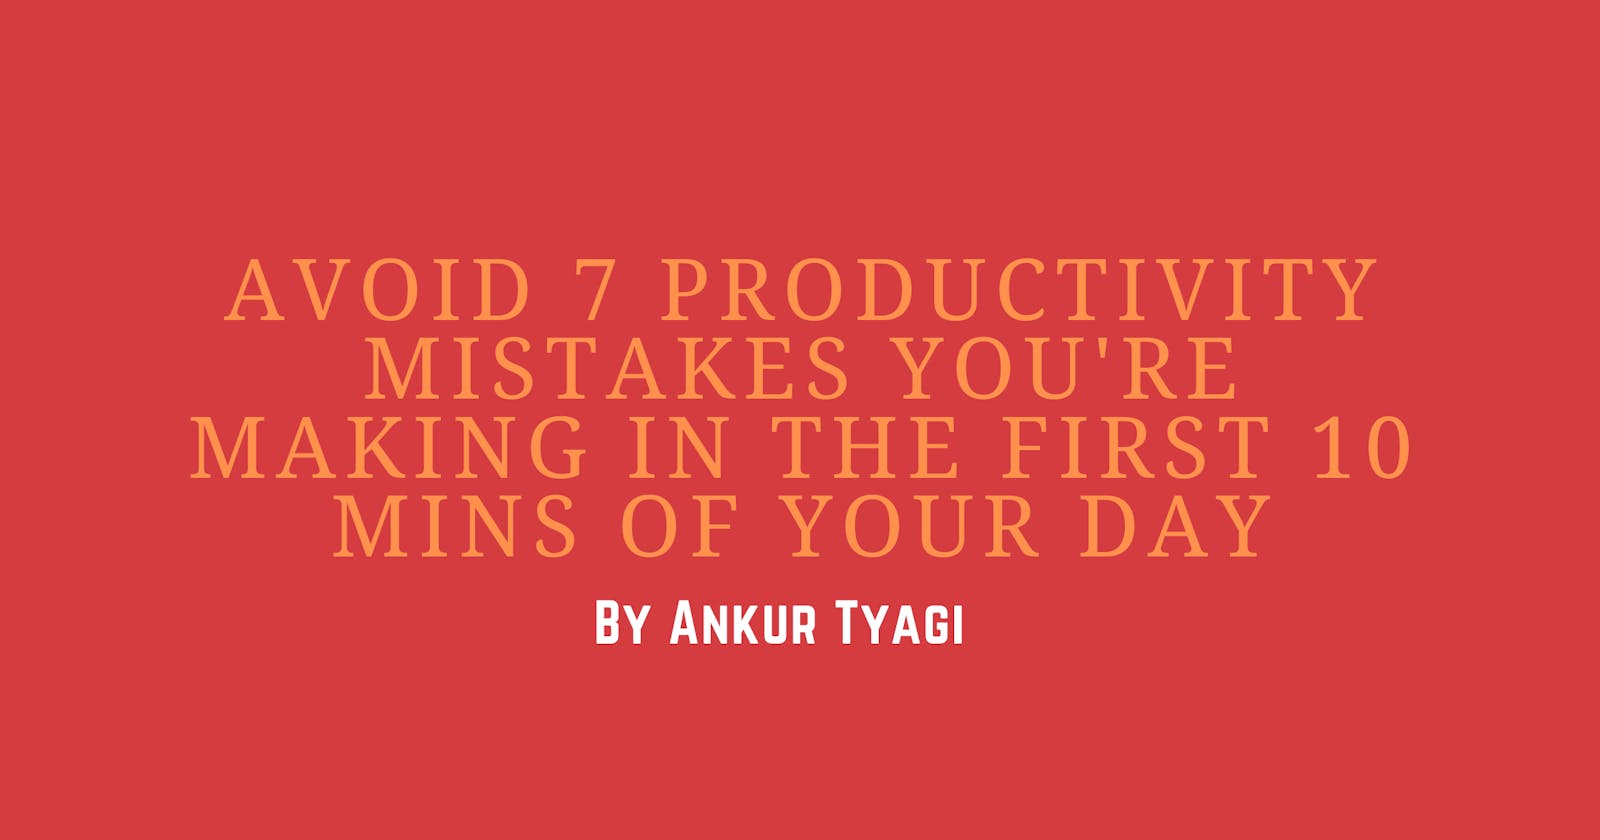 Avoid 7 Productivity Mistakes You're Making in The First 10 mins of Your Day